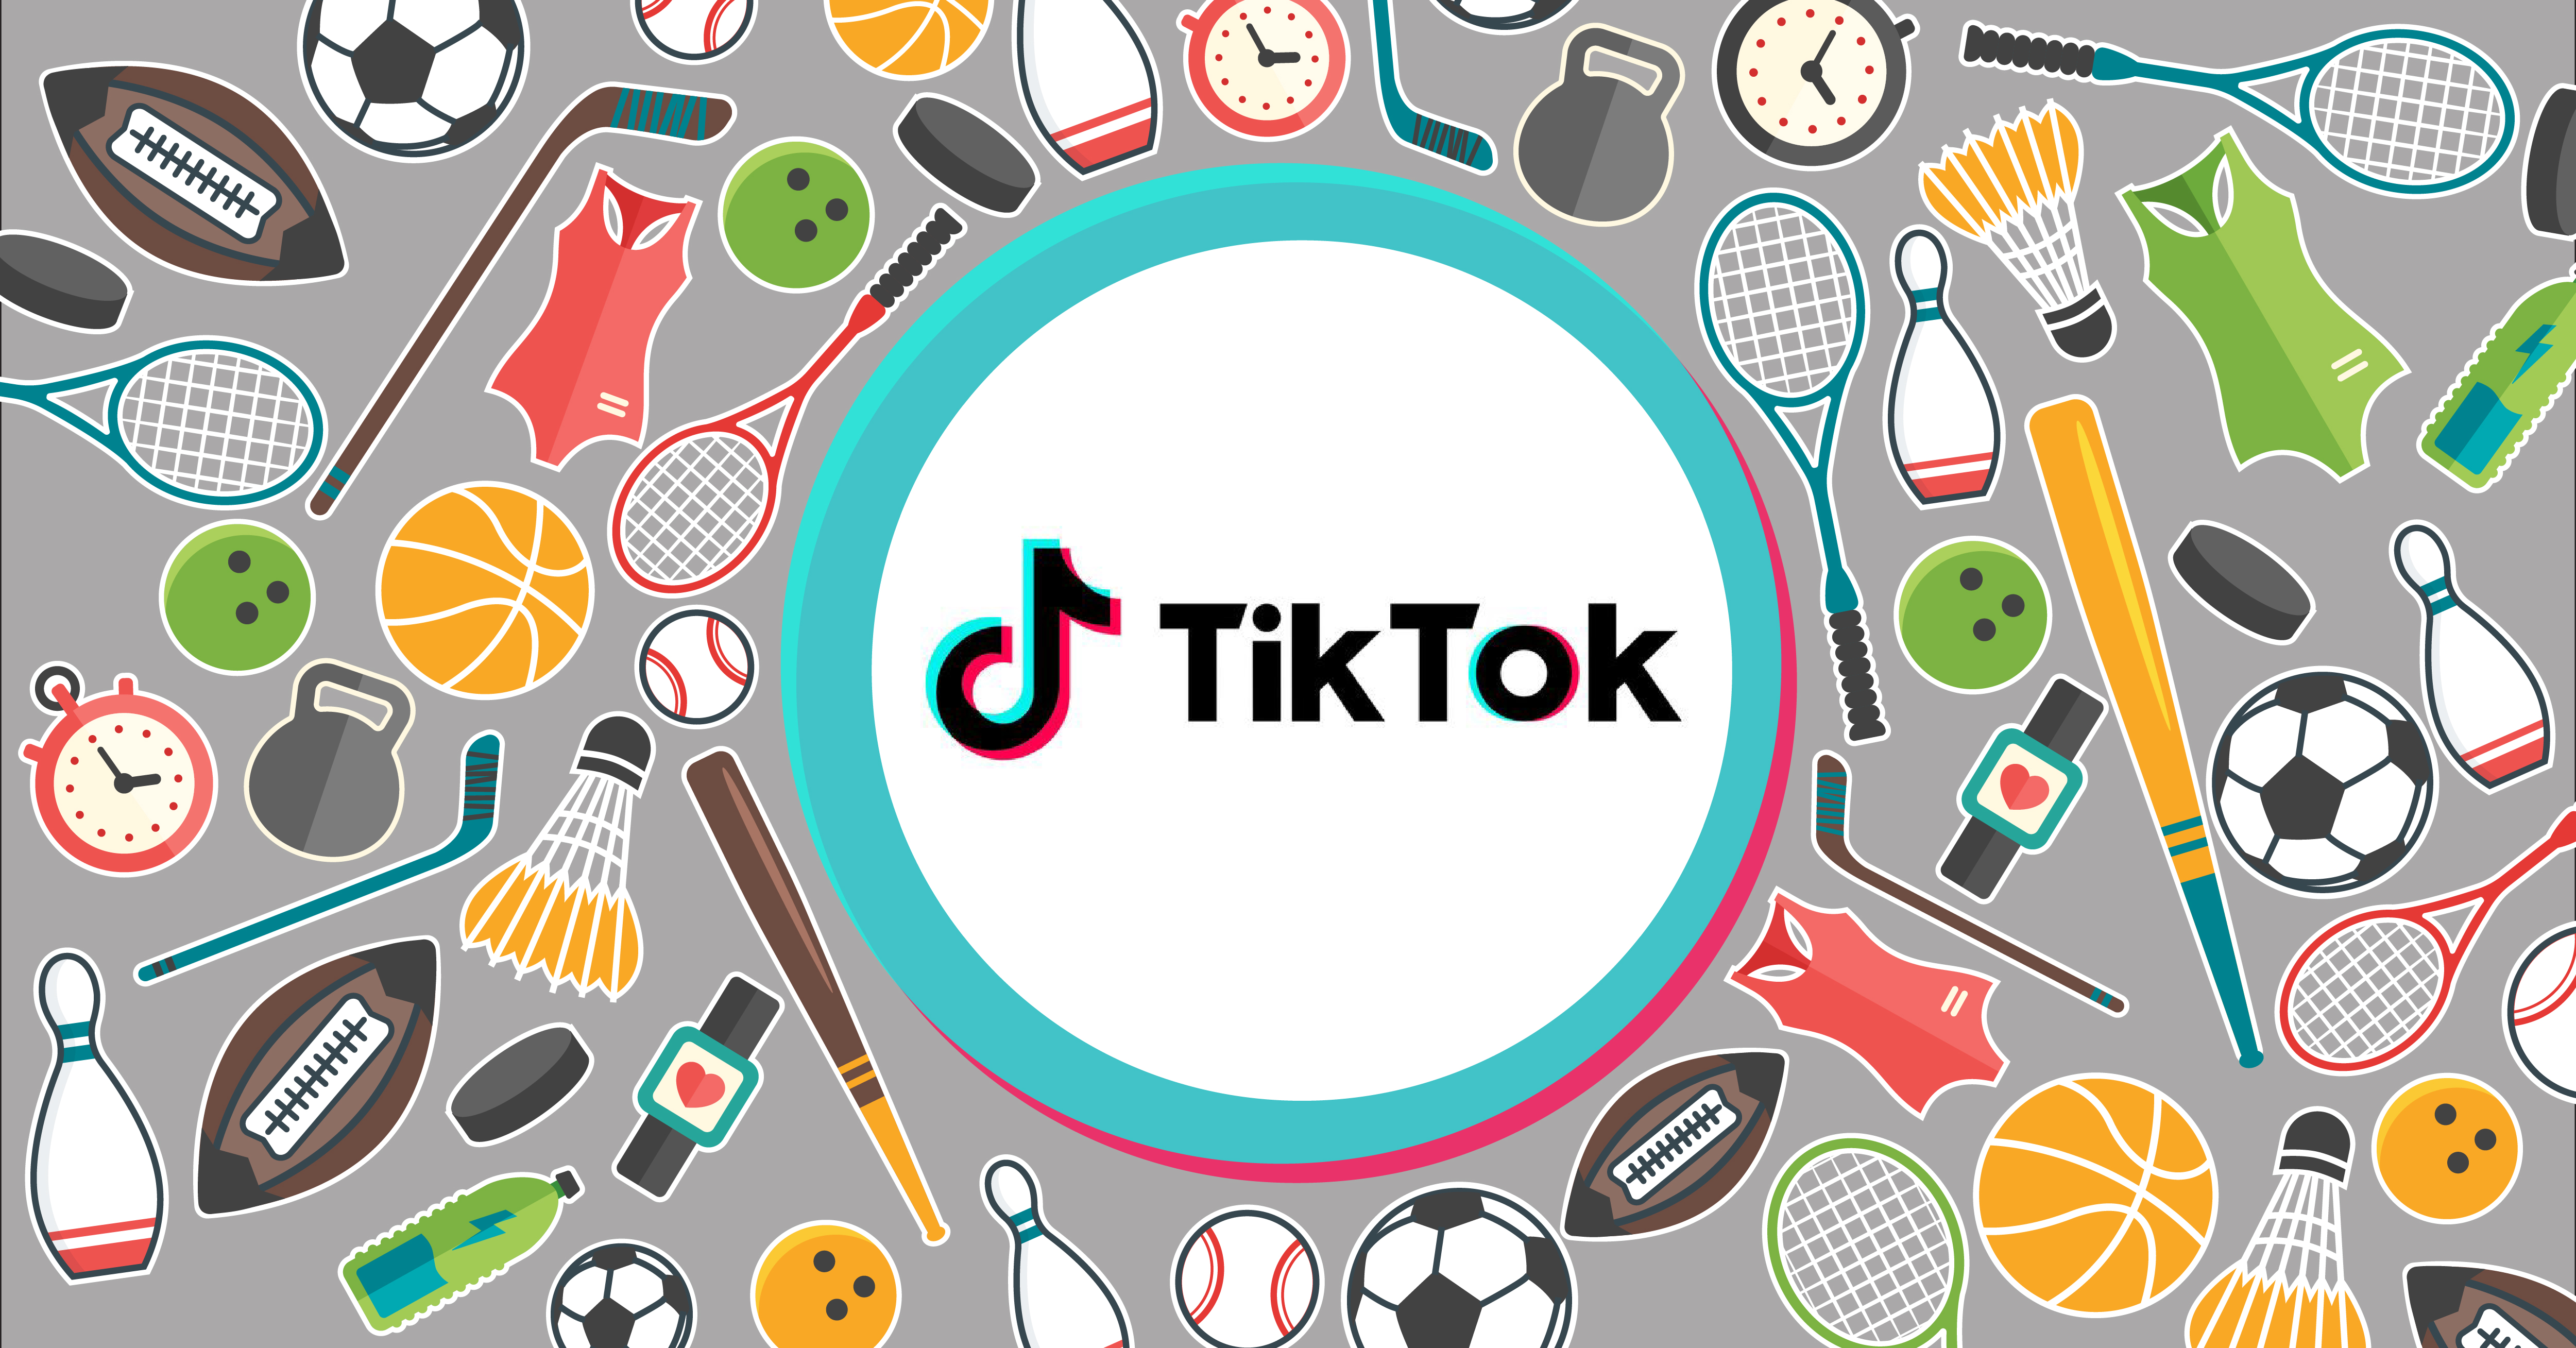 During the coronavirus, athlete influencers on TikTok are becoming more engaging and popular.